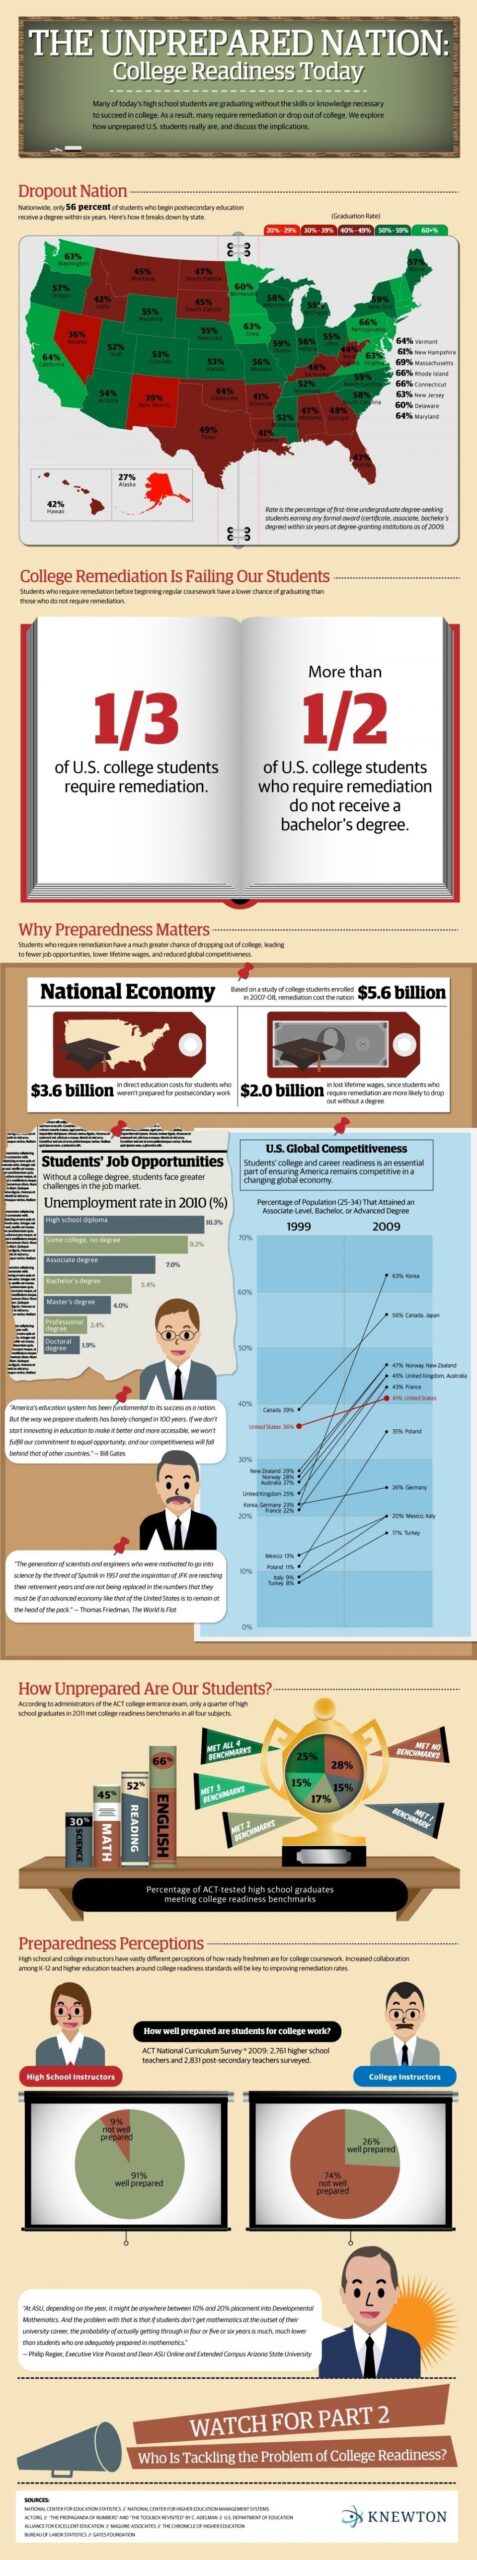 Freshmen Facts: Top 10 Most Popular College Majors [INFOGRAPHIC] - Infographic List